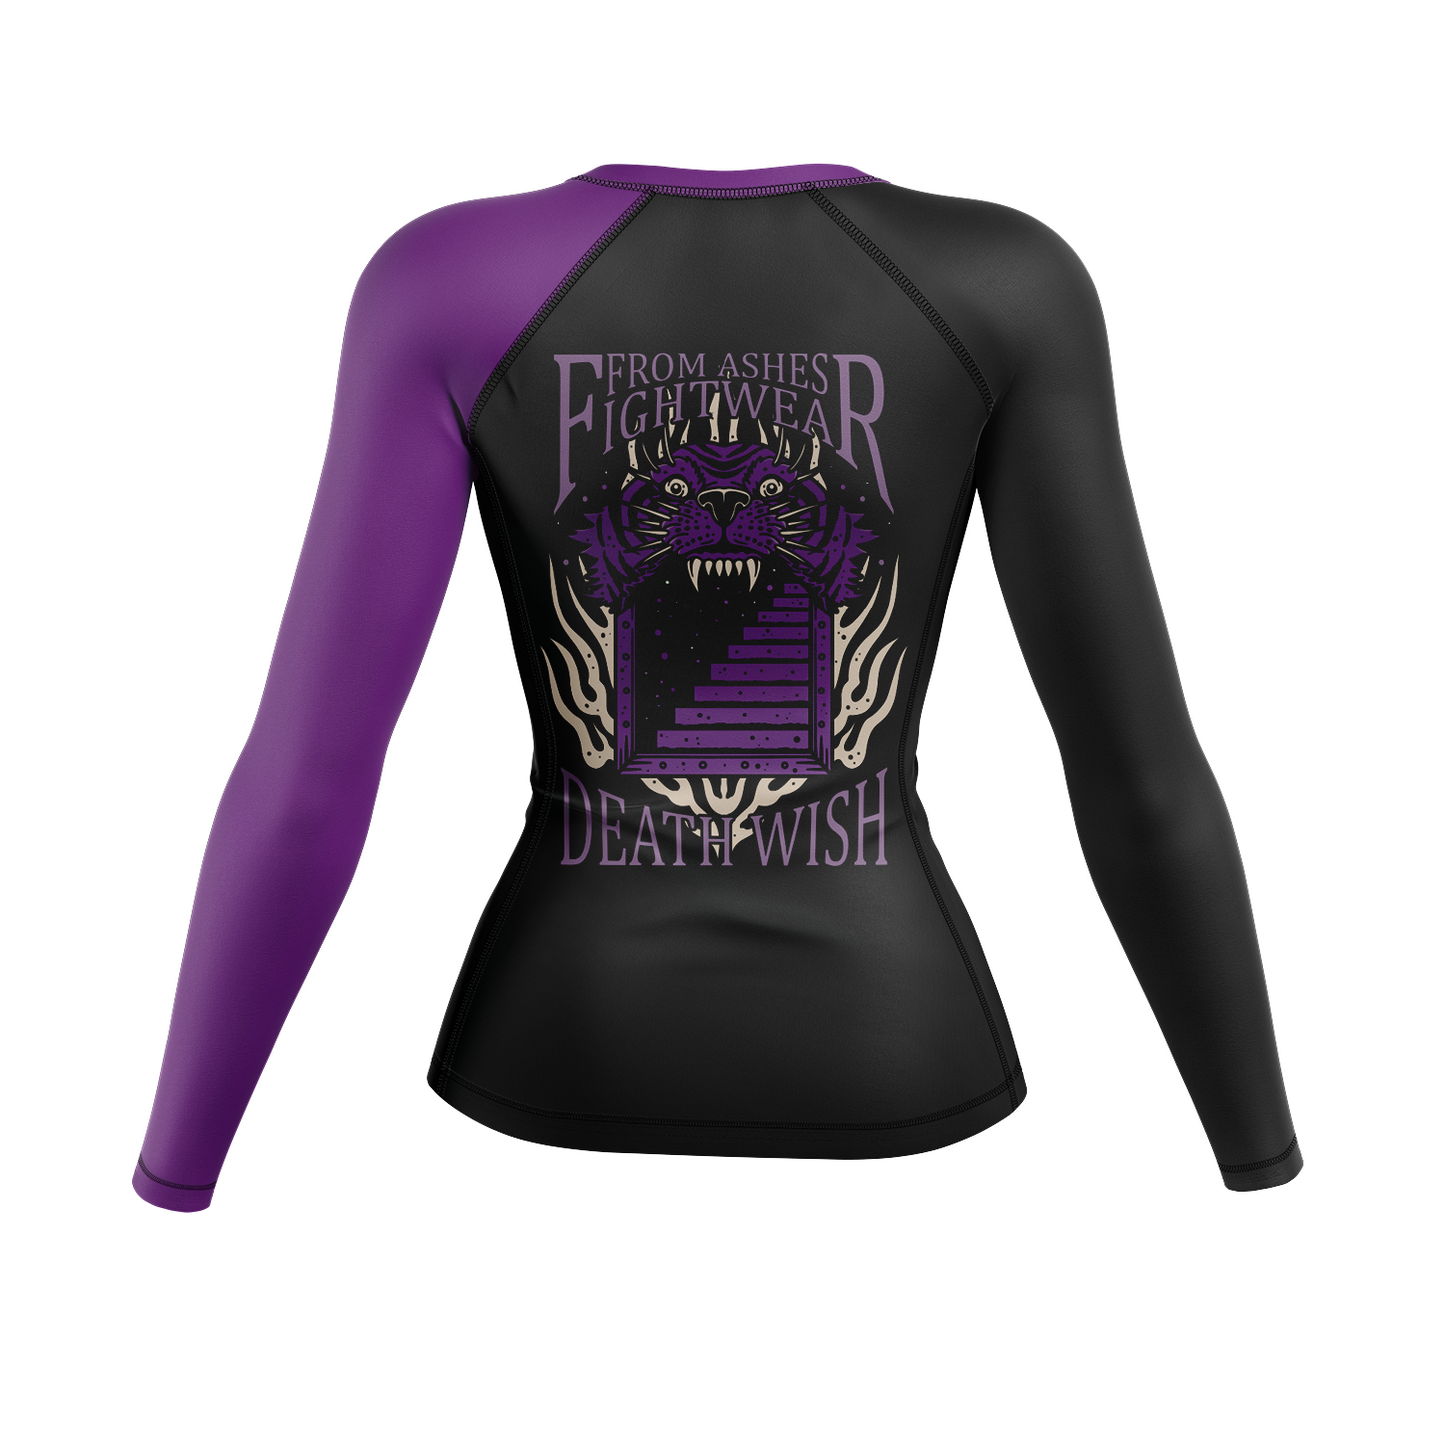 From Ashes Fightwear women's rash guard Death Wish Ranked, black and purple